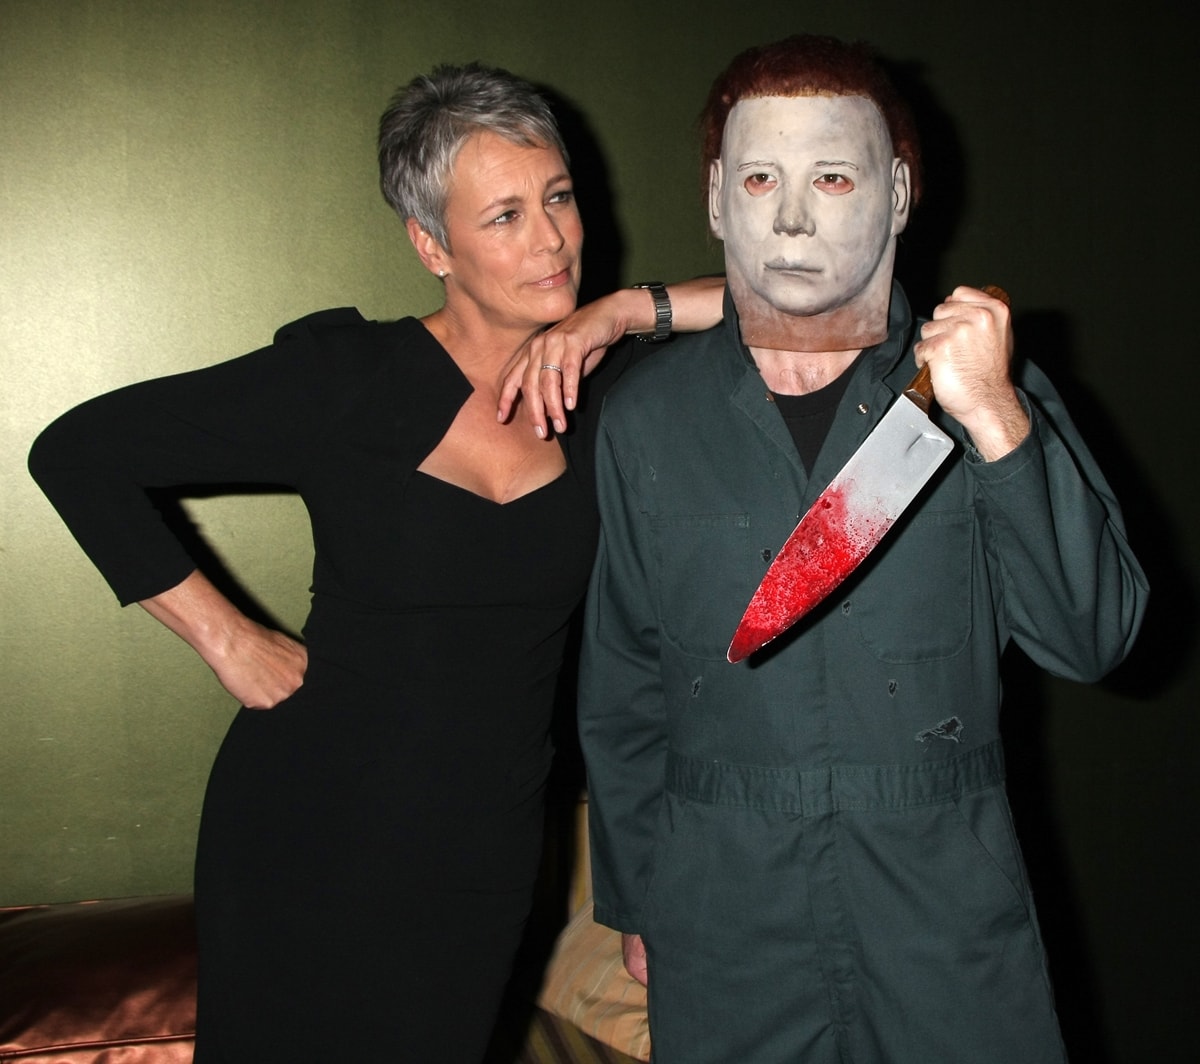 Actress Jamie Lee Curtis poses backstage with Michael Myers